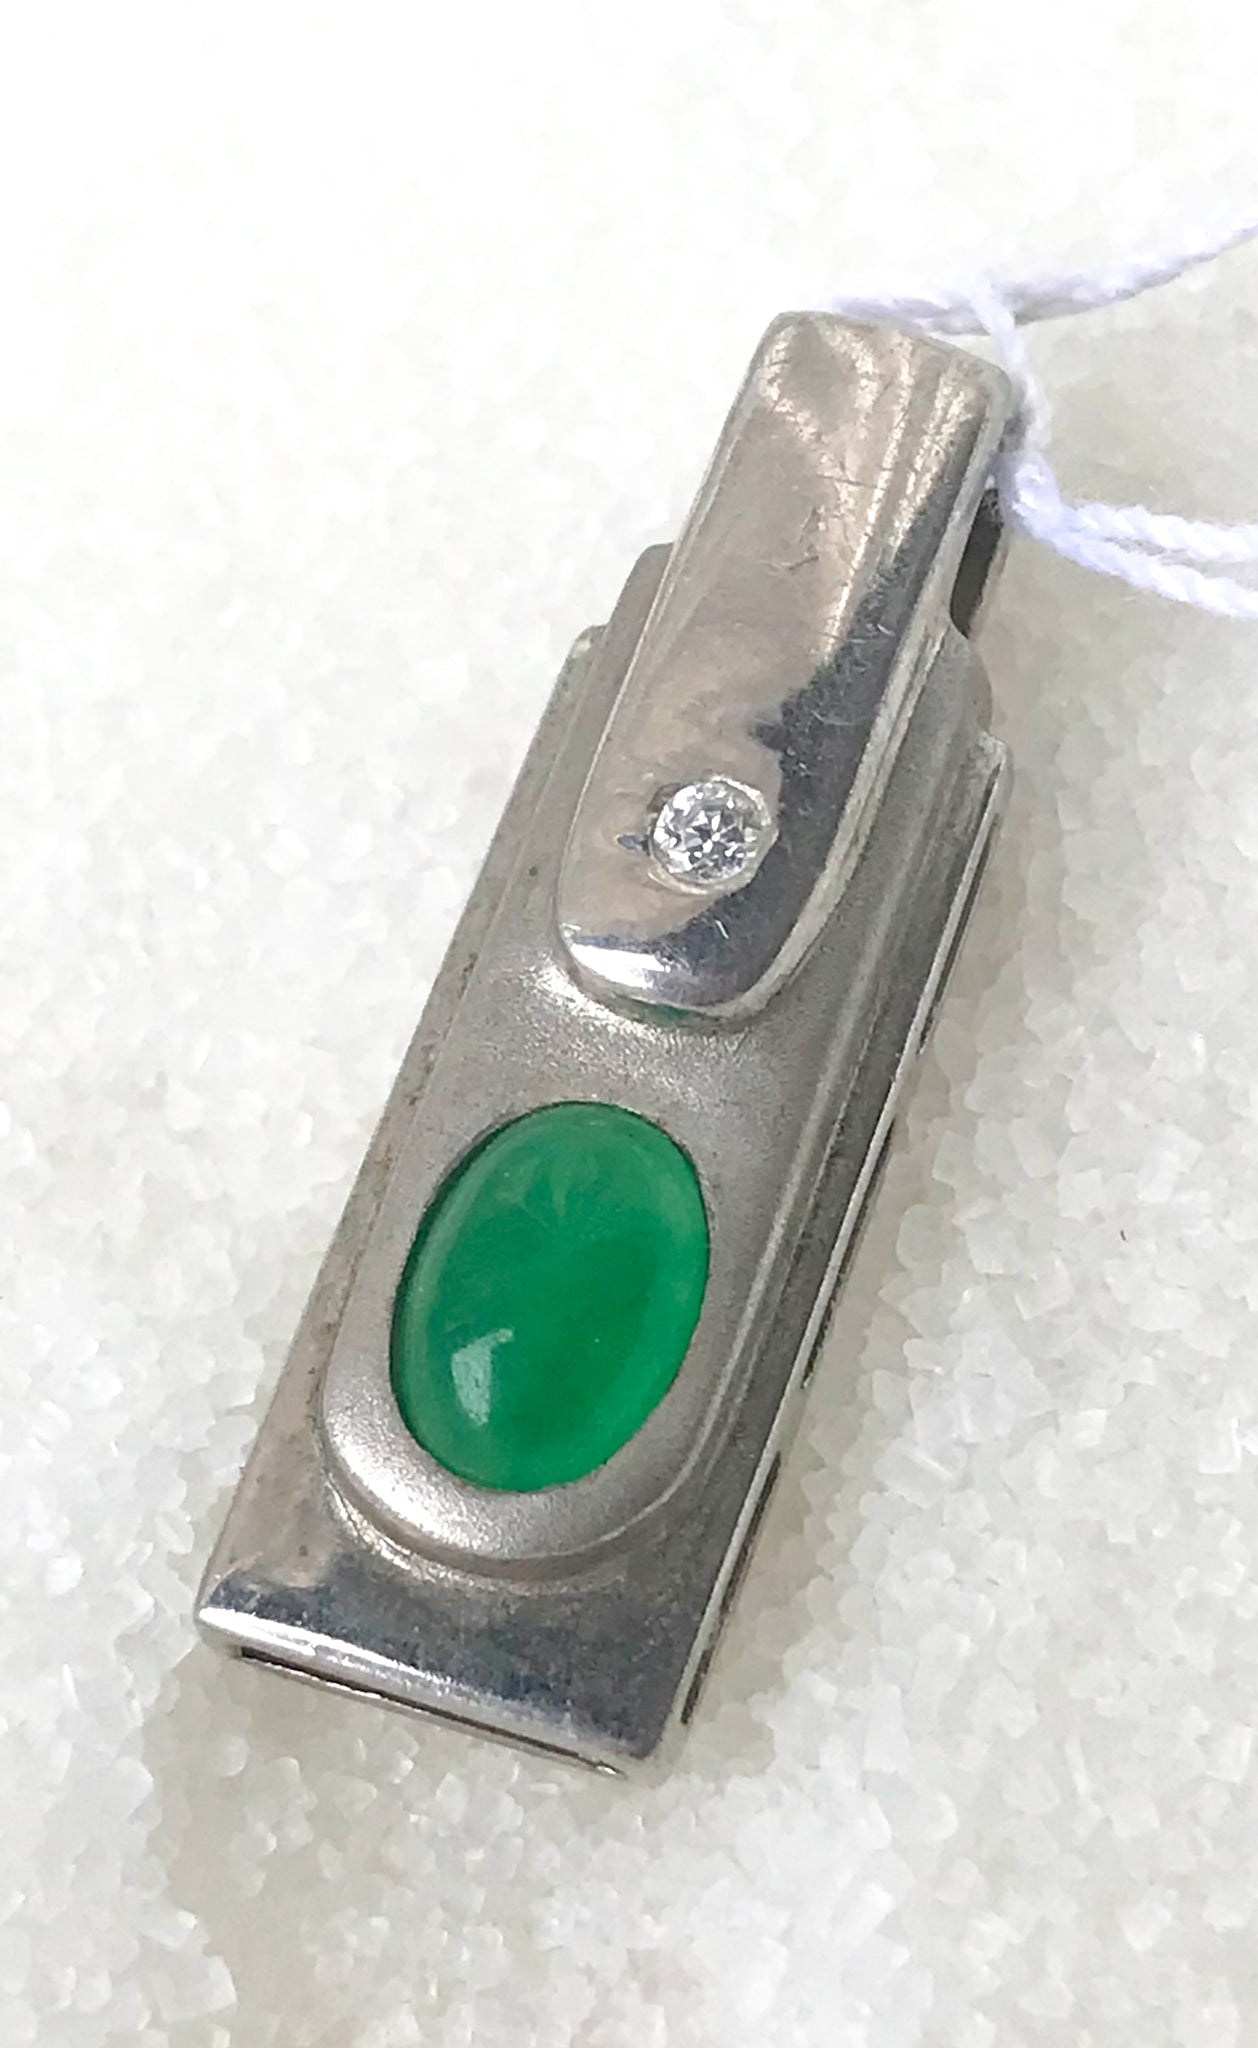 Silver pendant with diamante and green accents